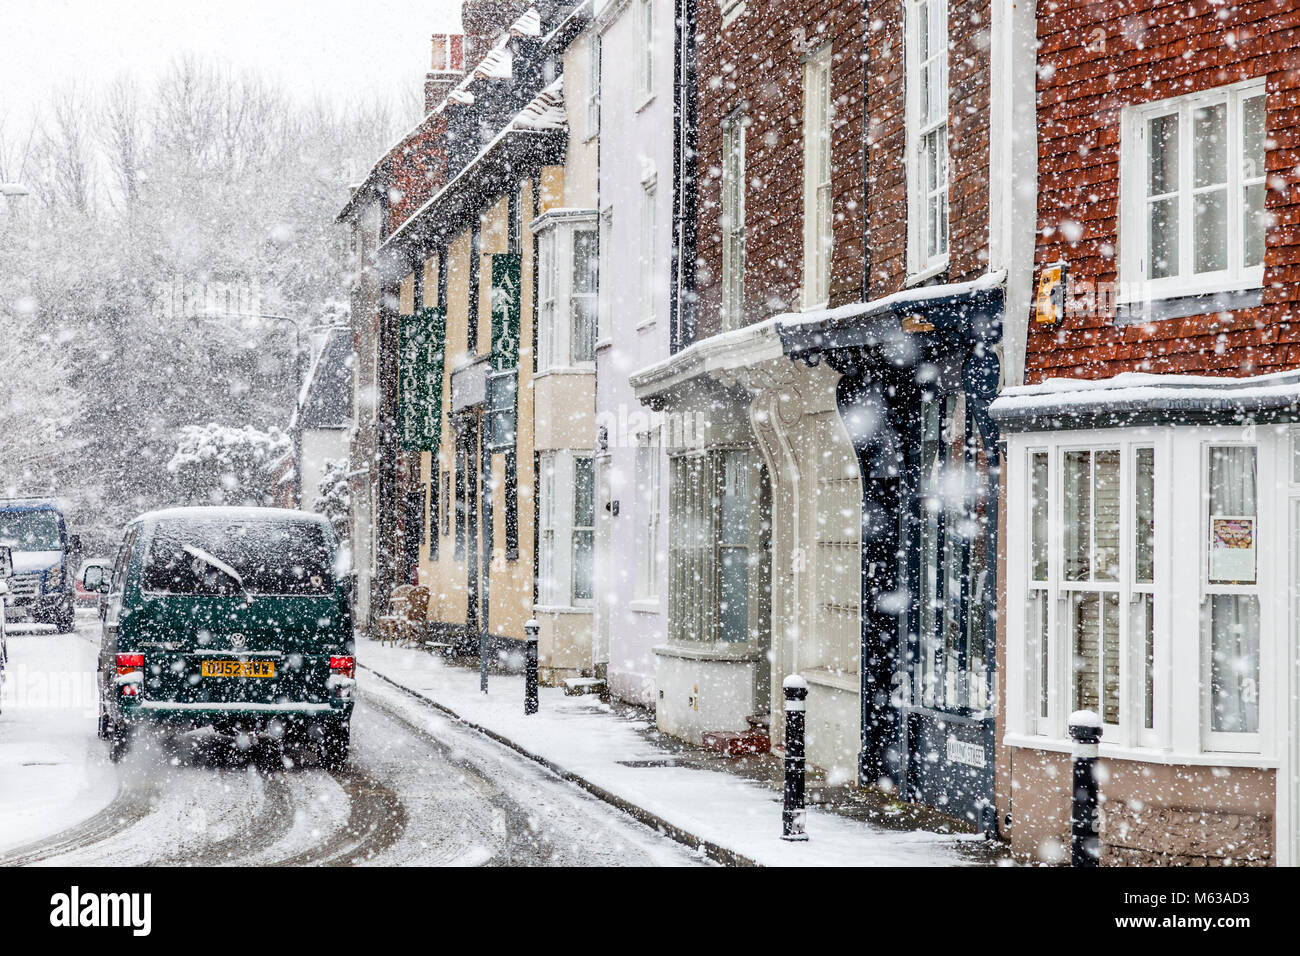 A wintery scene in the county town of Lewes, East Sussex, UK Stock Photo